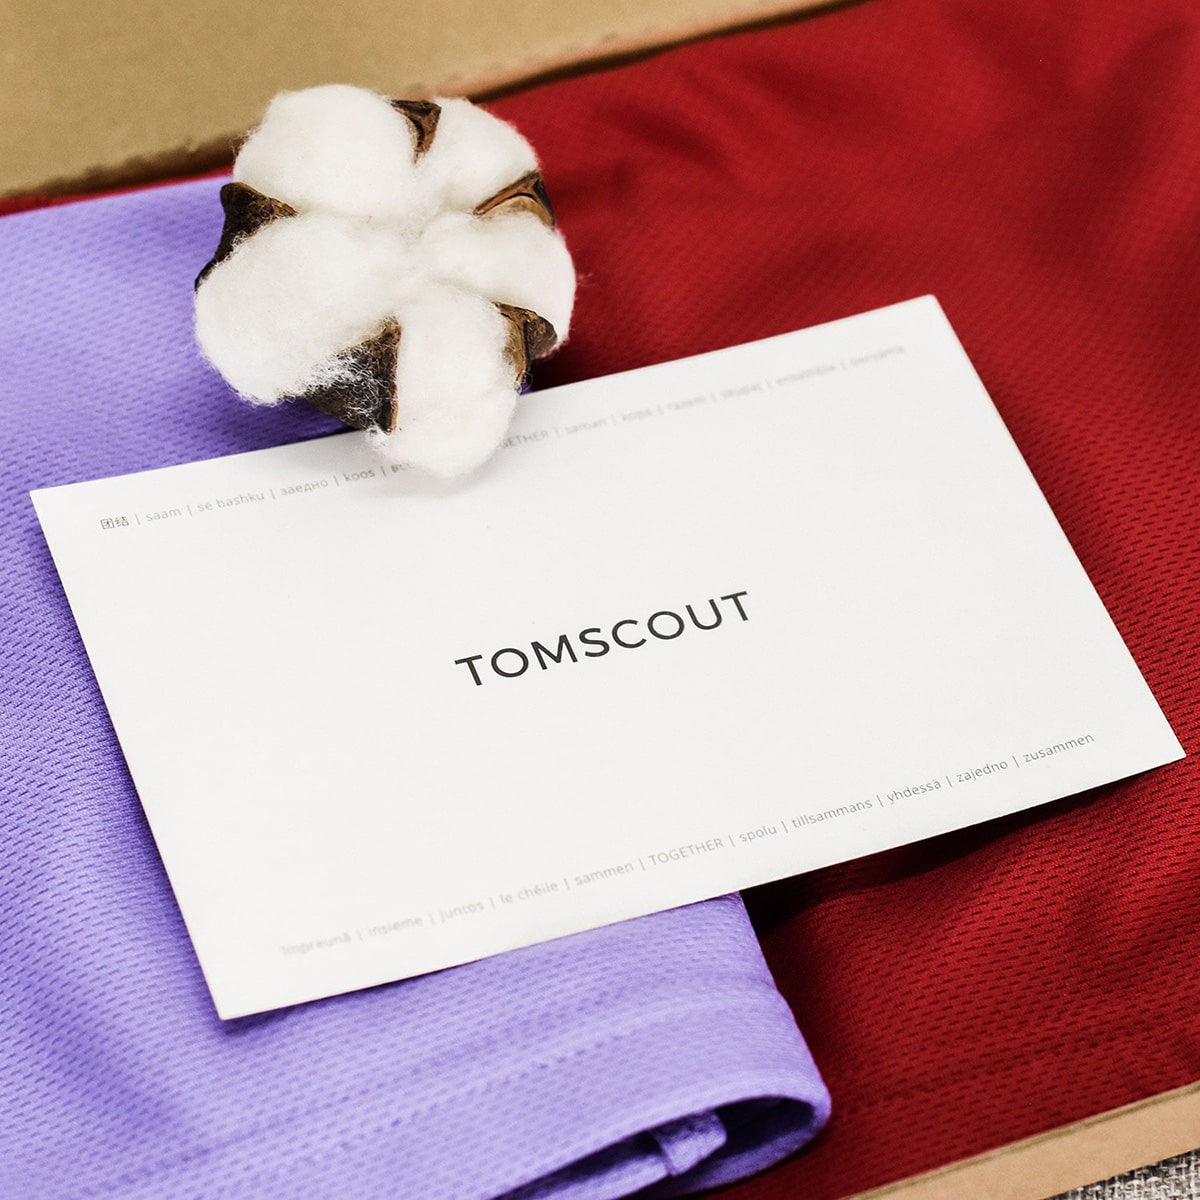 Inside a gift box, lavender purple and scarlet red Chest Binders are thoughtfully arranged with a TOMSCOUT inspirational thank you card, a gesture of profound support for the LGBTQ community. Highlighting the TOMSCOUT Free Chest Binder Program, The Freedom Binder.